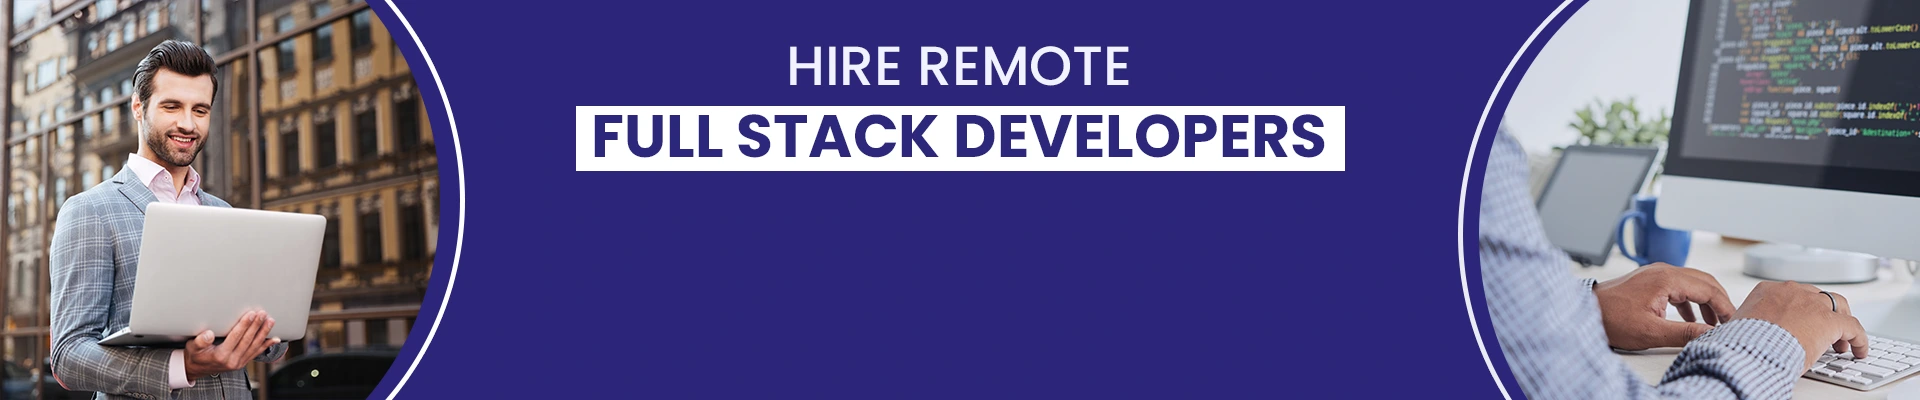 Hire-Remote-Full-Stack-Developers-2023